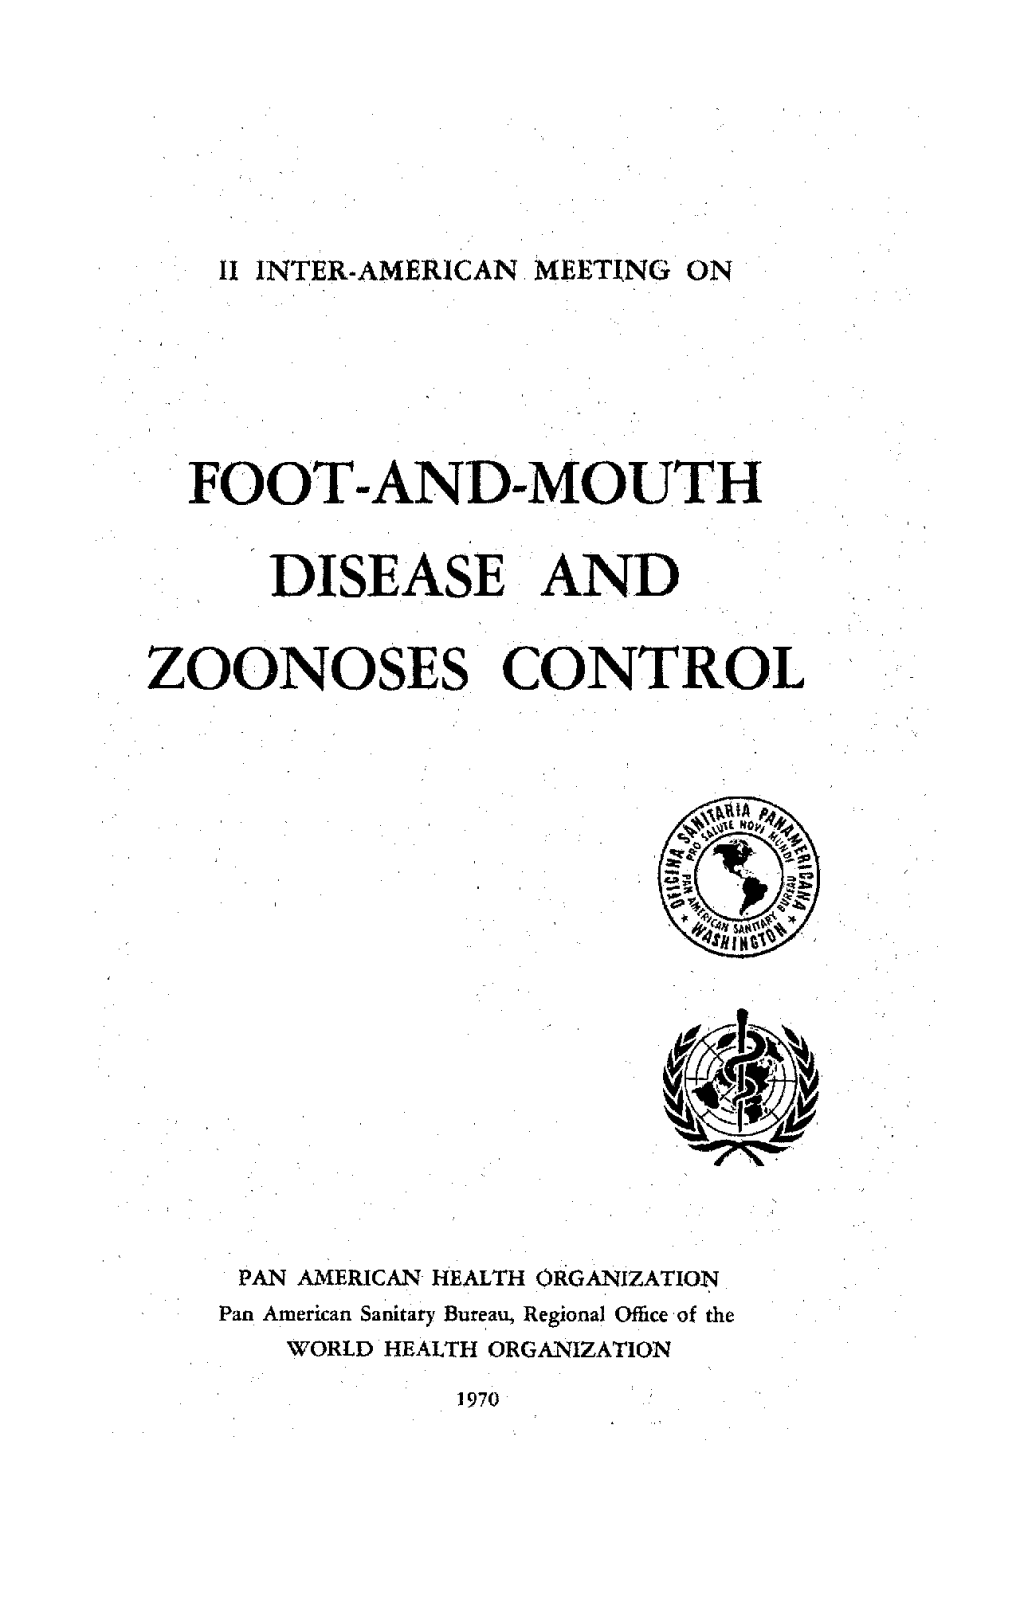 Foot-And-Mouth Disease and Zoonoses Control